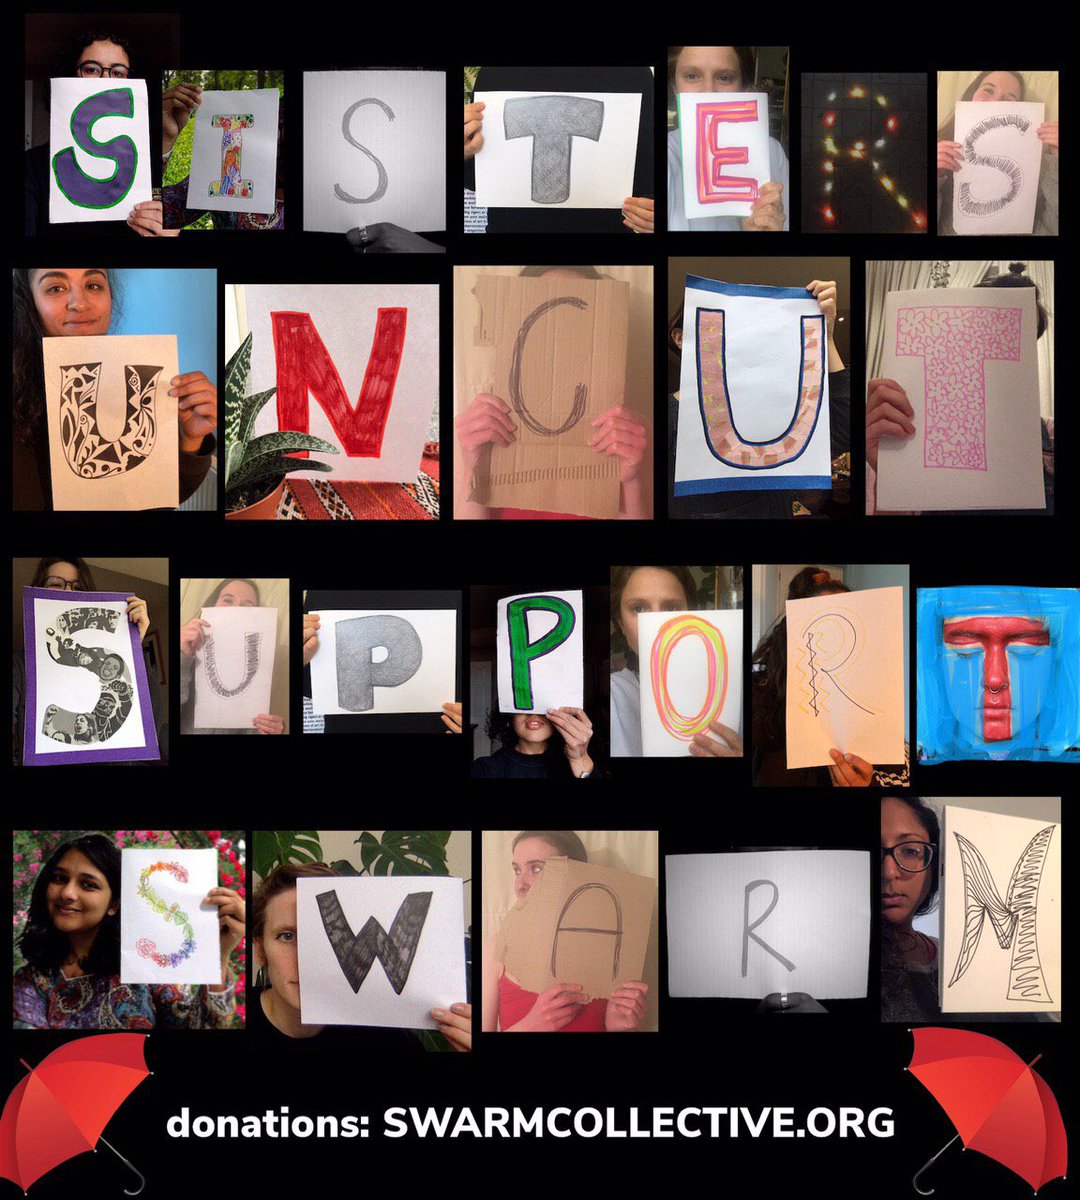 If you can, please donate to SWARM’s hardship fund Sex workers are facing crisis because of #COVID19. In the face of (inevitable) gov failure to protect our communities - mutual aid and solidarity is vital!